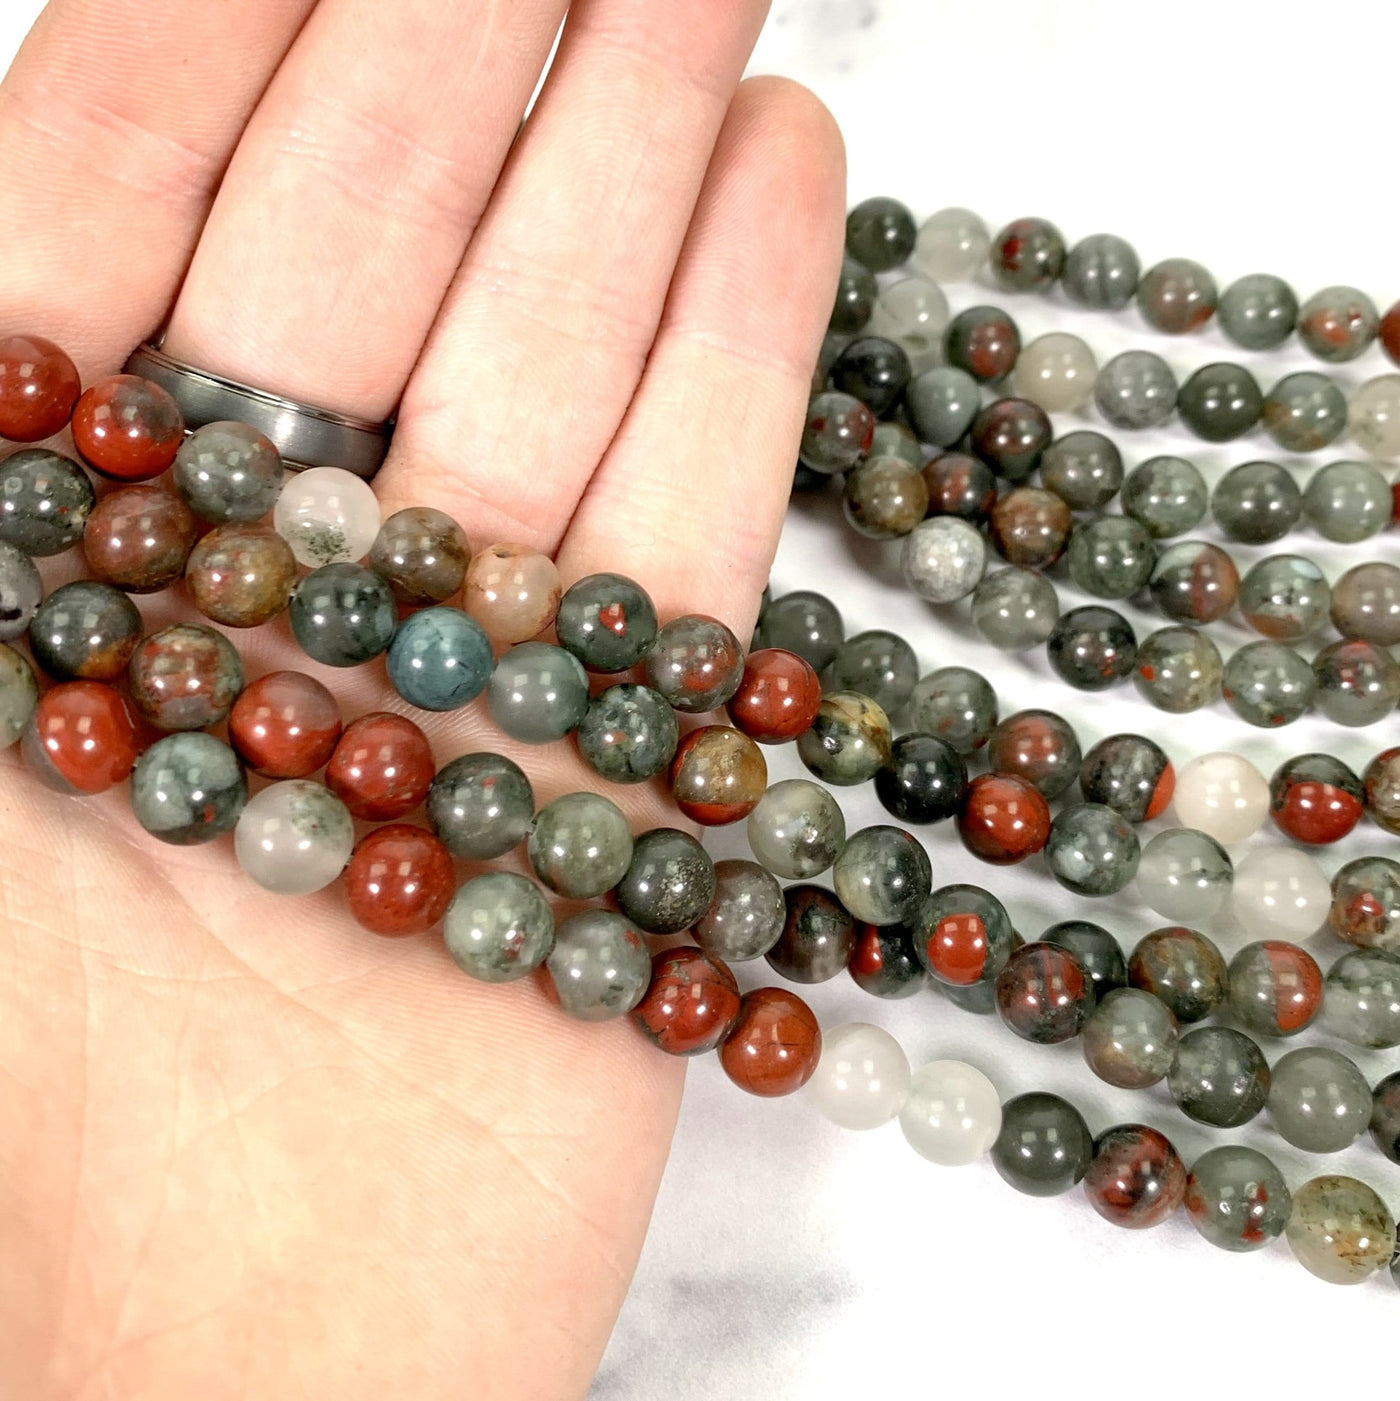 Close up of African Bloodstone Polished Round Beads on Strand in a hand.